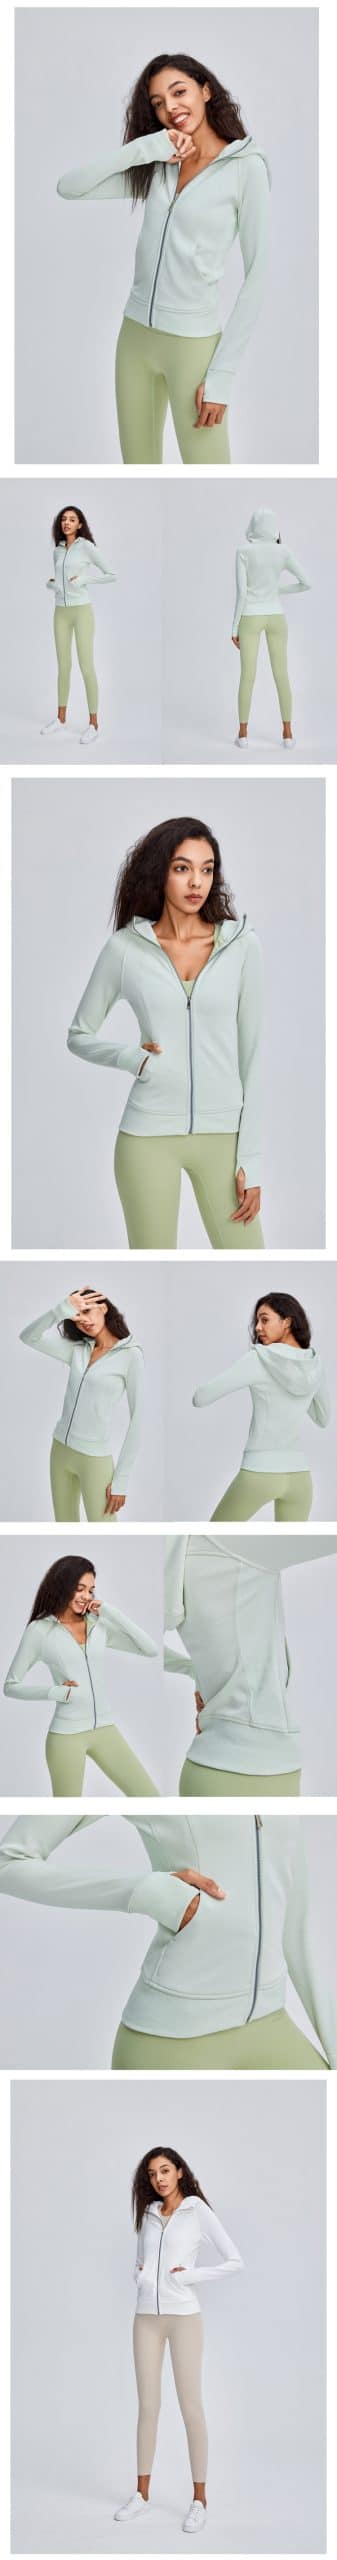 Yoga Top Long Sleeve Sports Top sport jacket With Pocket Clothes Sports And Fitness Workout Tops Open Back Top Workout Crop Top